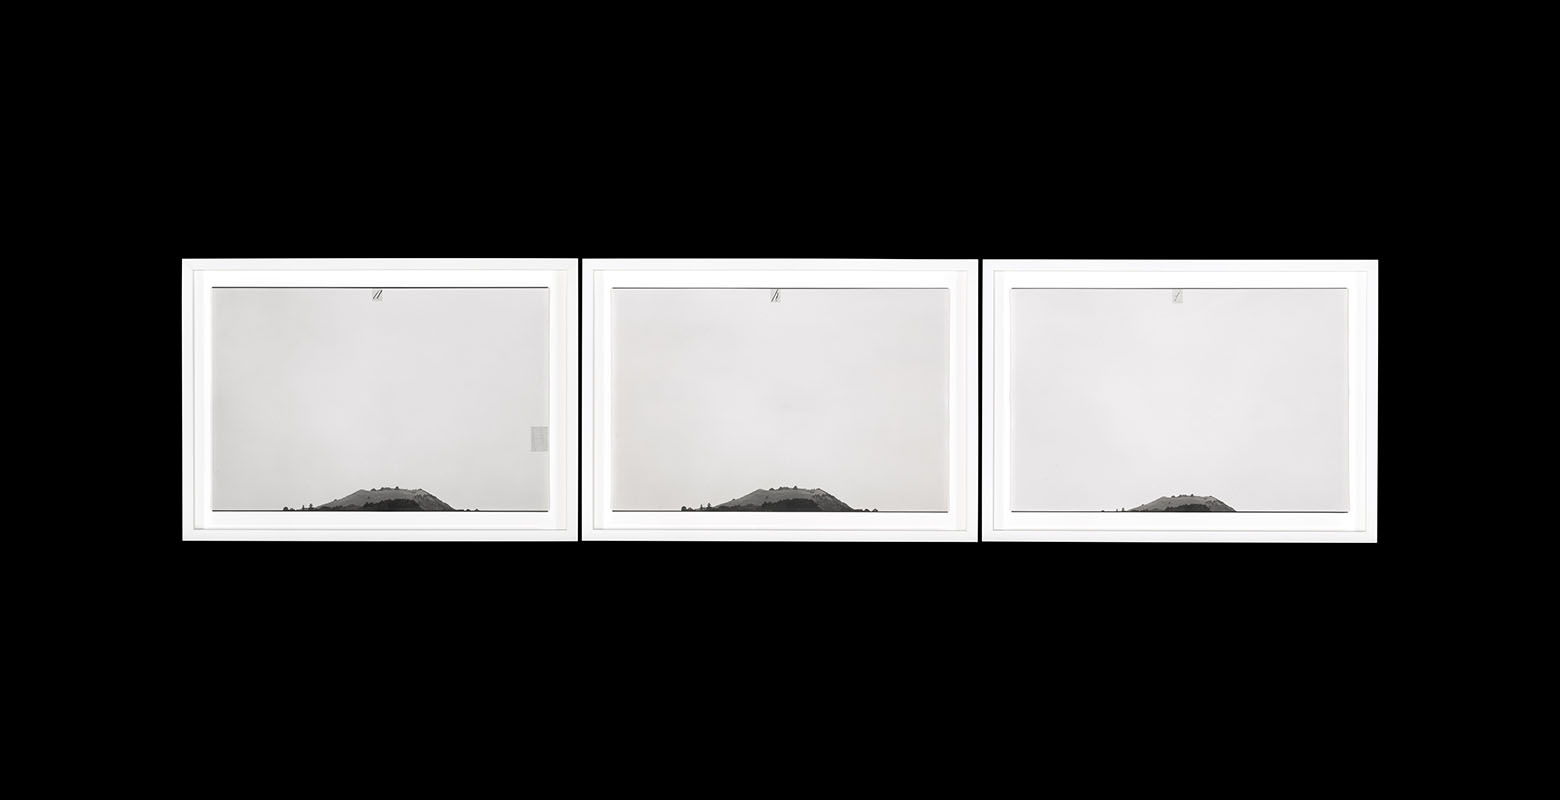 A set of three photographs in identical white frames. All photos depict a hilltop, framed at the bottom to allow the cloudy sky to take up the vast majority of the photograph. In addition, a letter is written at the top of each photo: H, I, A.